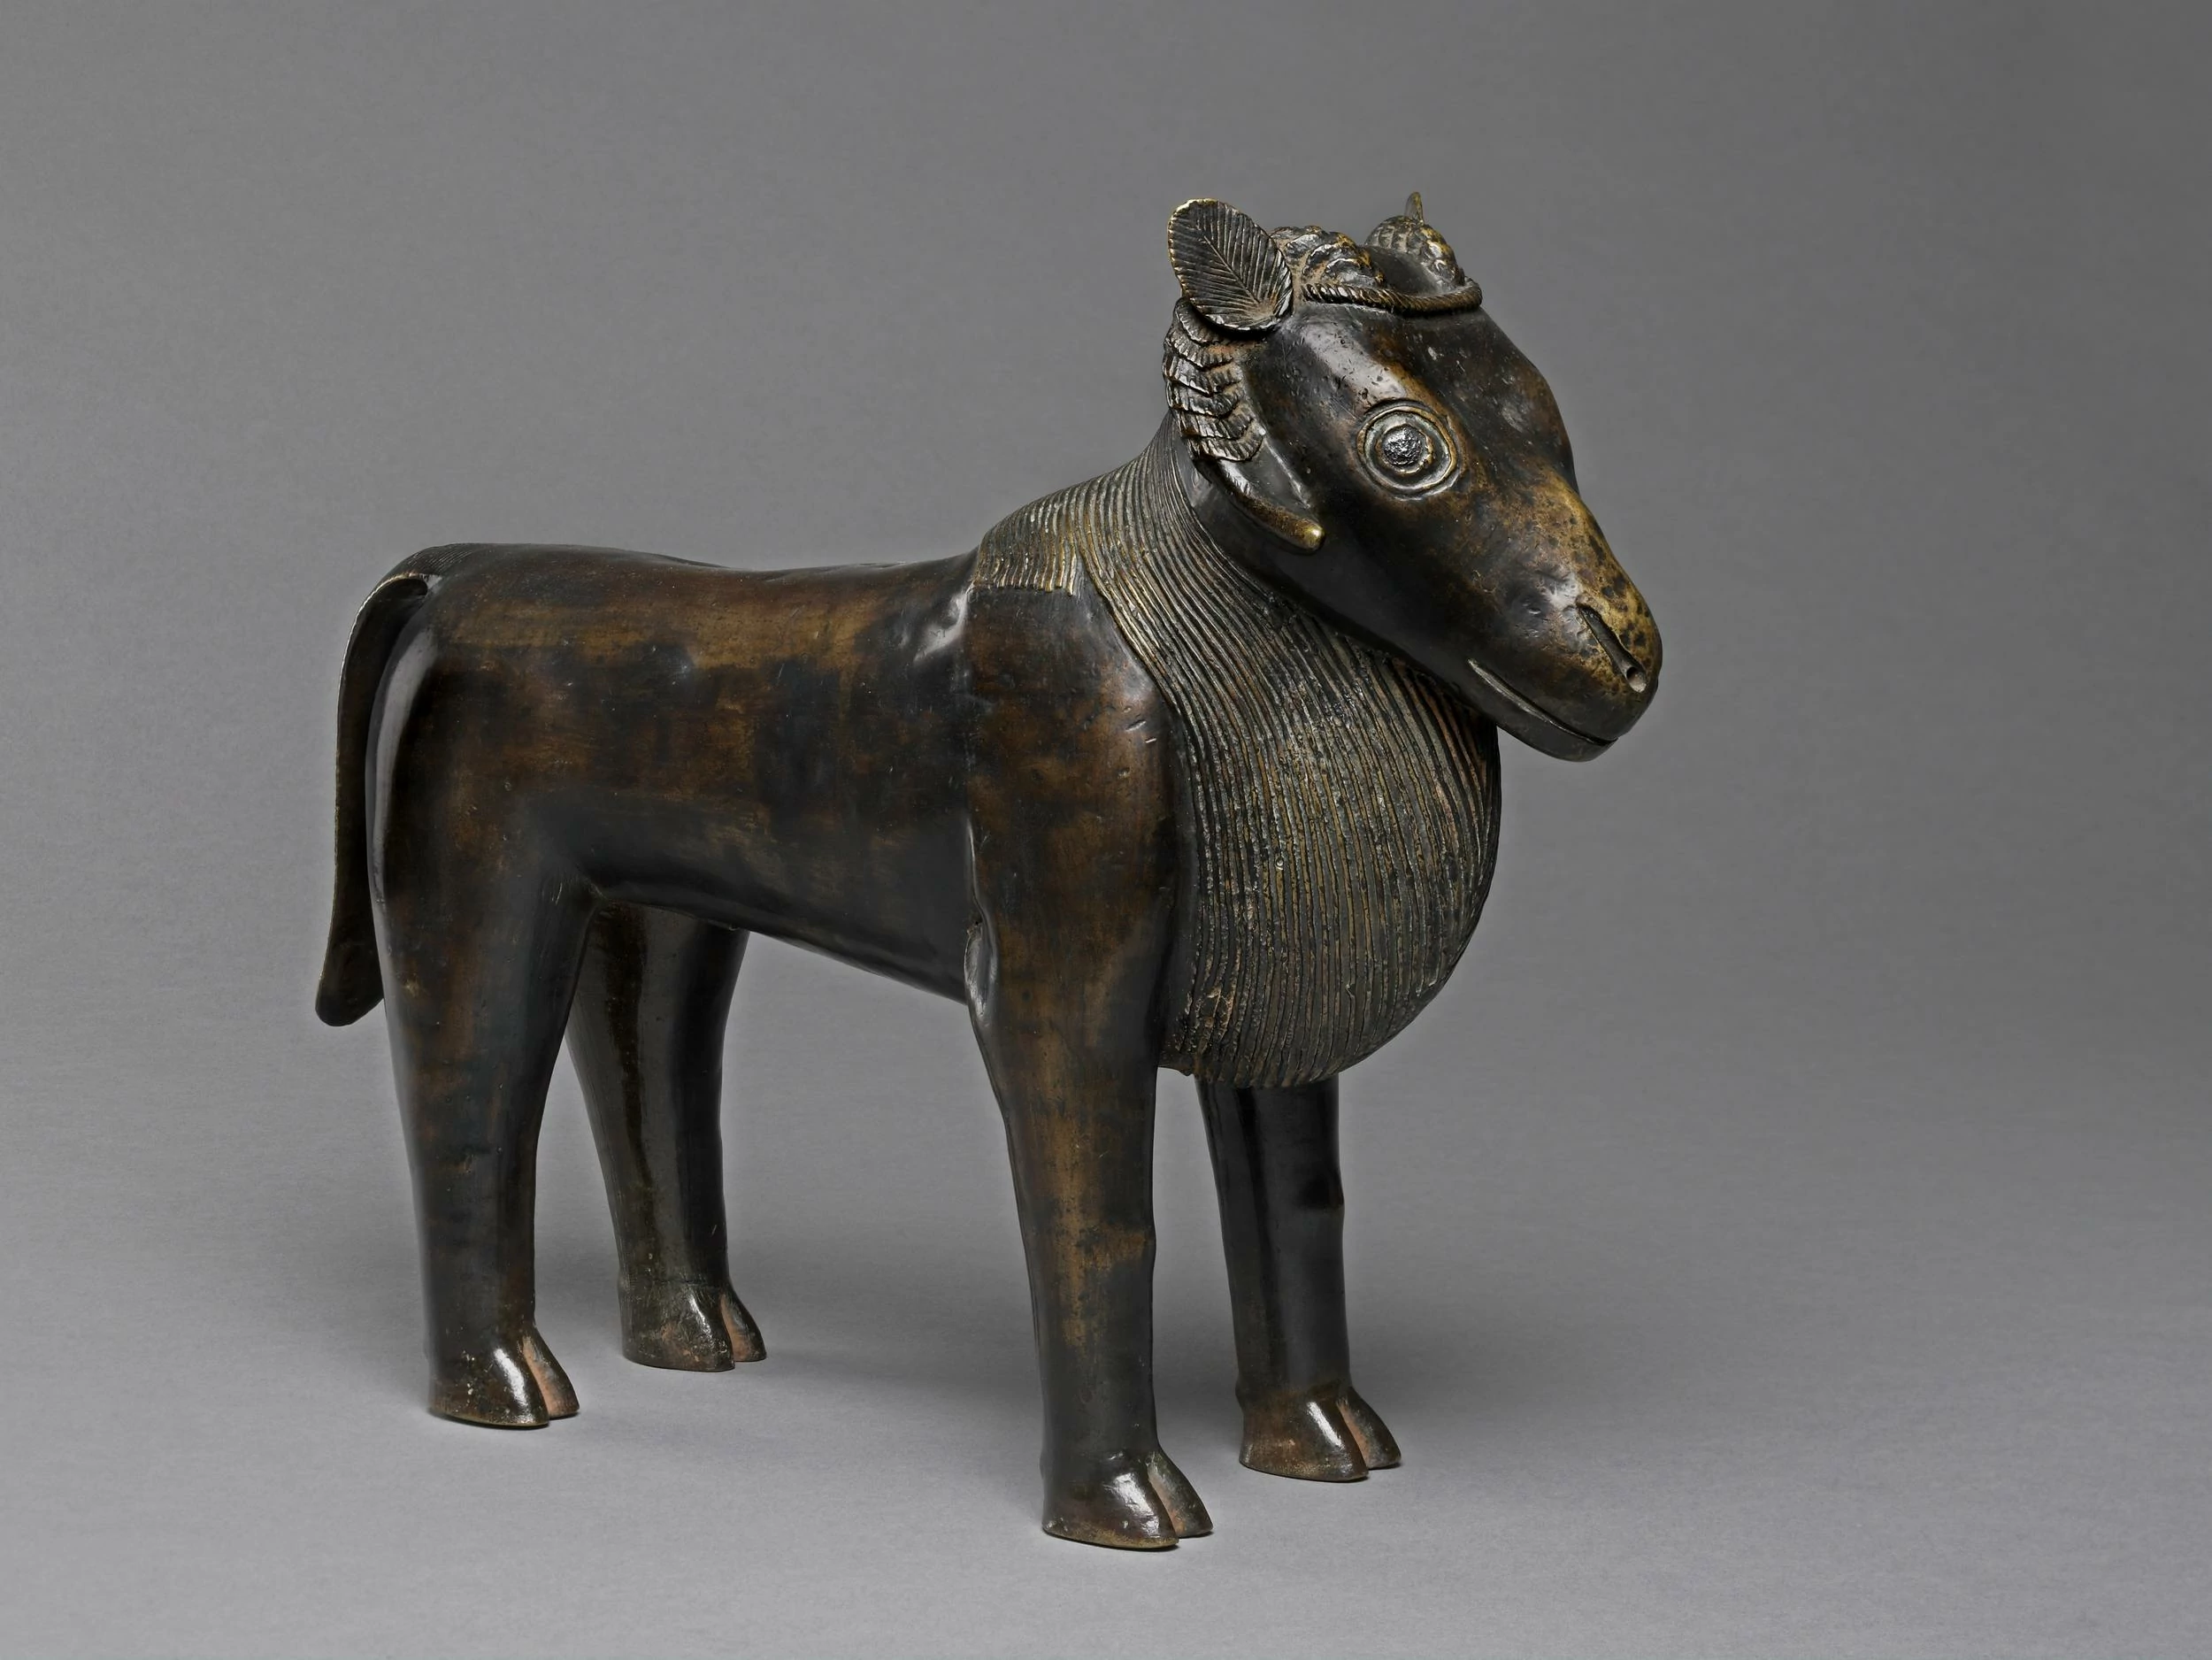 Aquamanile in the form of a ram, Kingdom of Benin